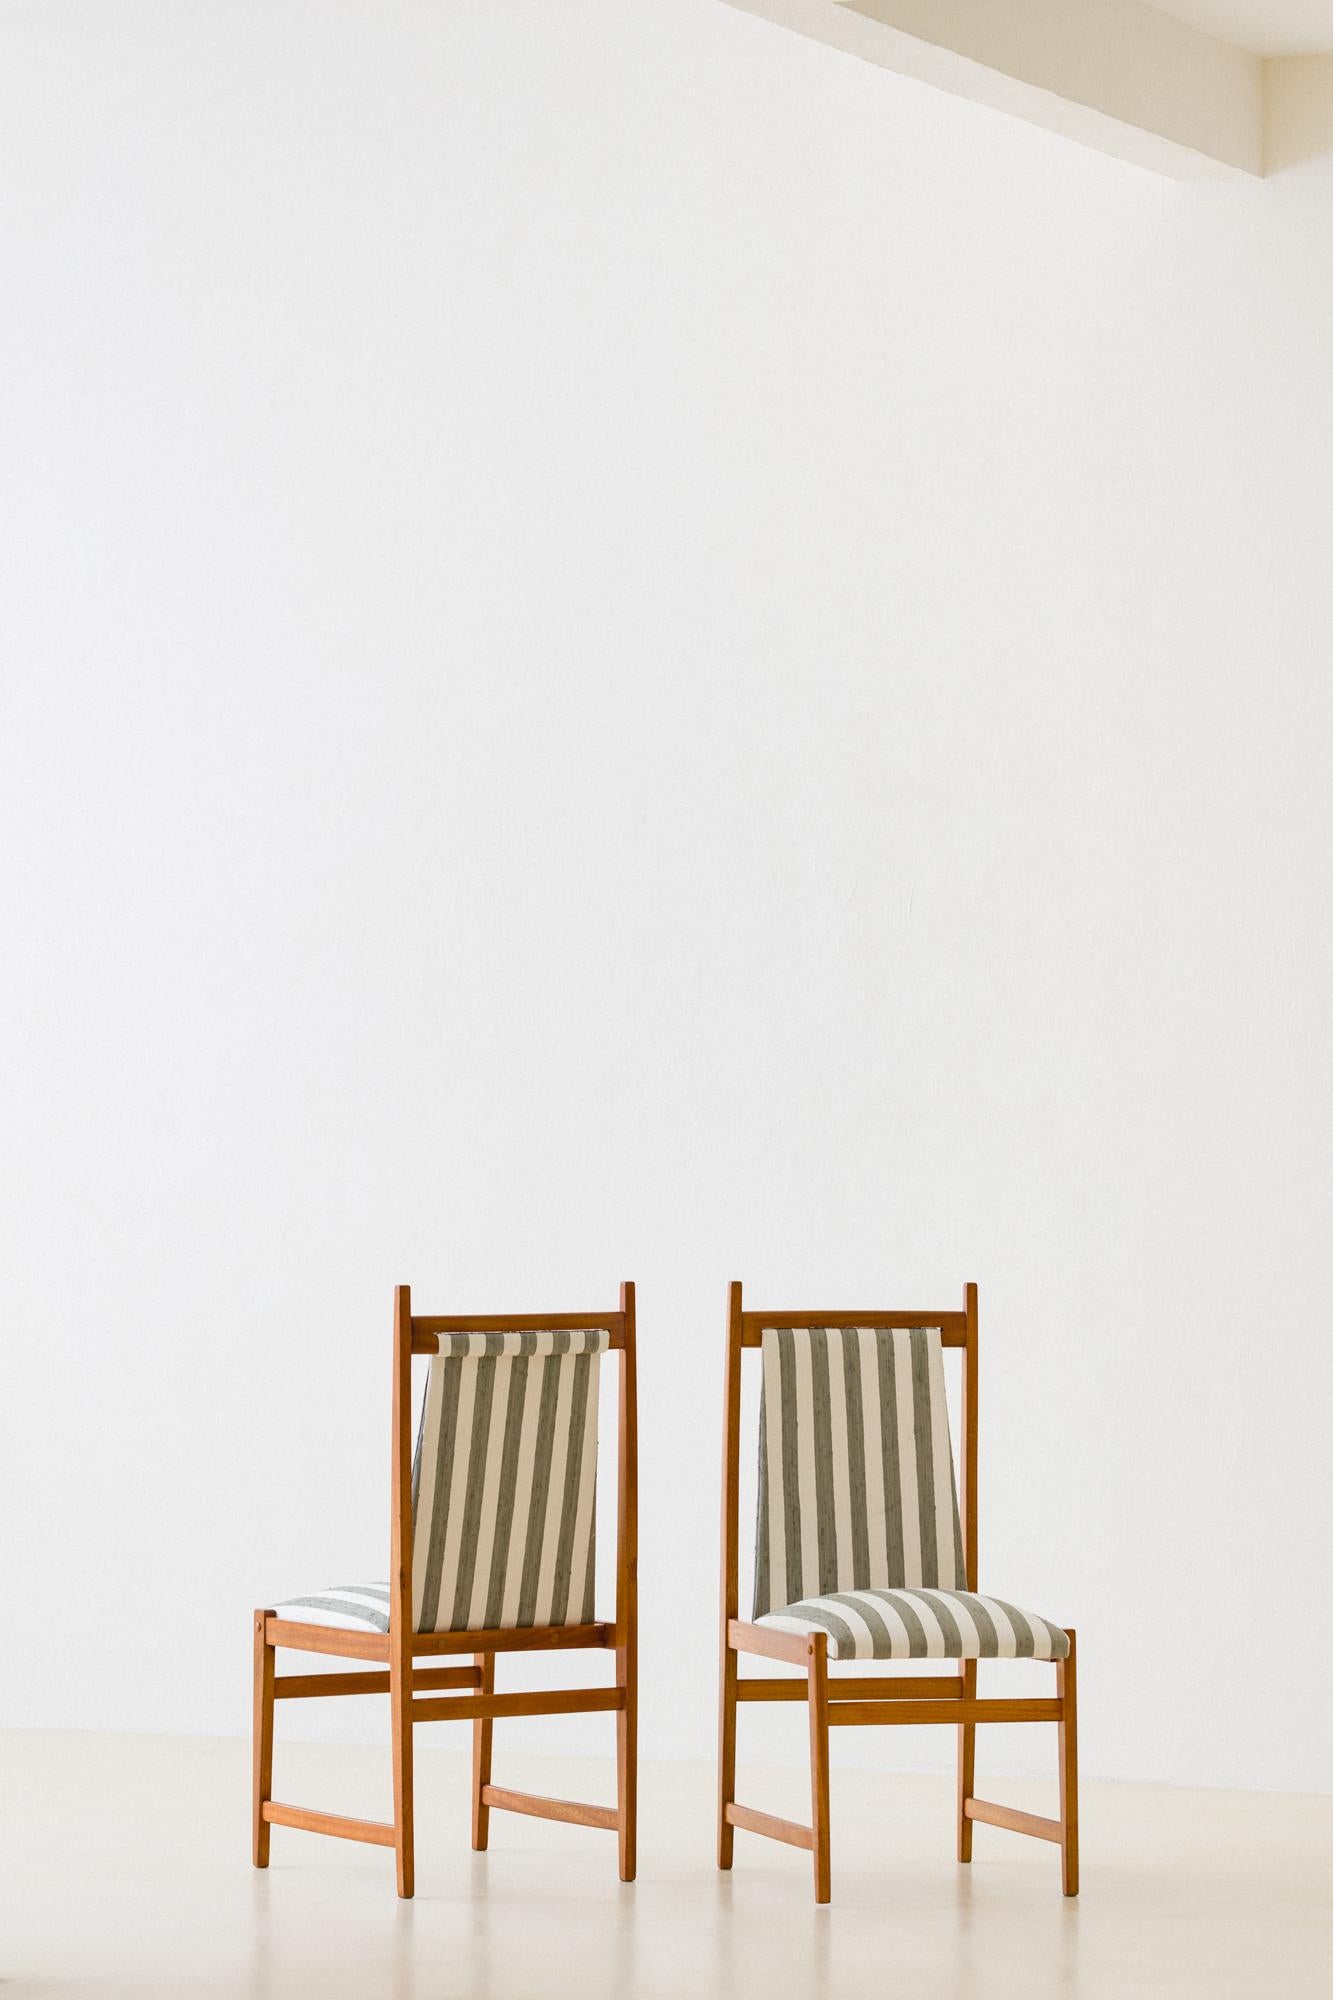 Hand-Woven Set of Six Dining Chairs, by Celina Decorações, 1960s, Brazilian Midcentury For Sale